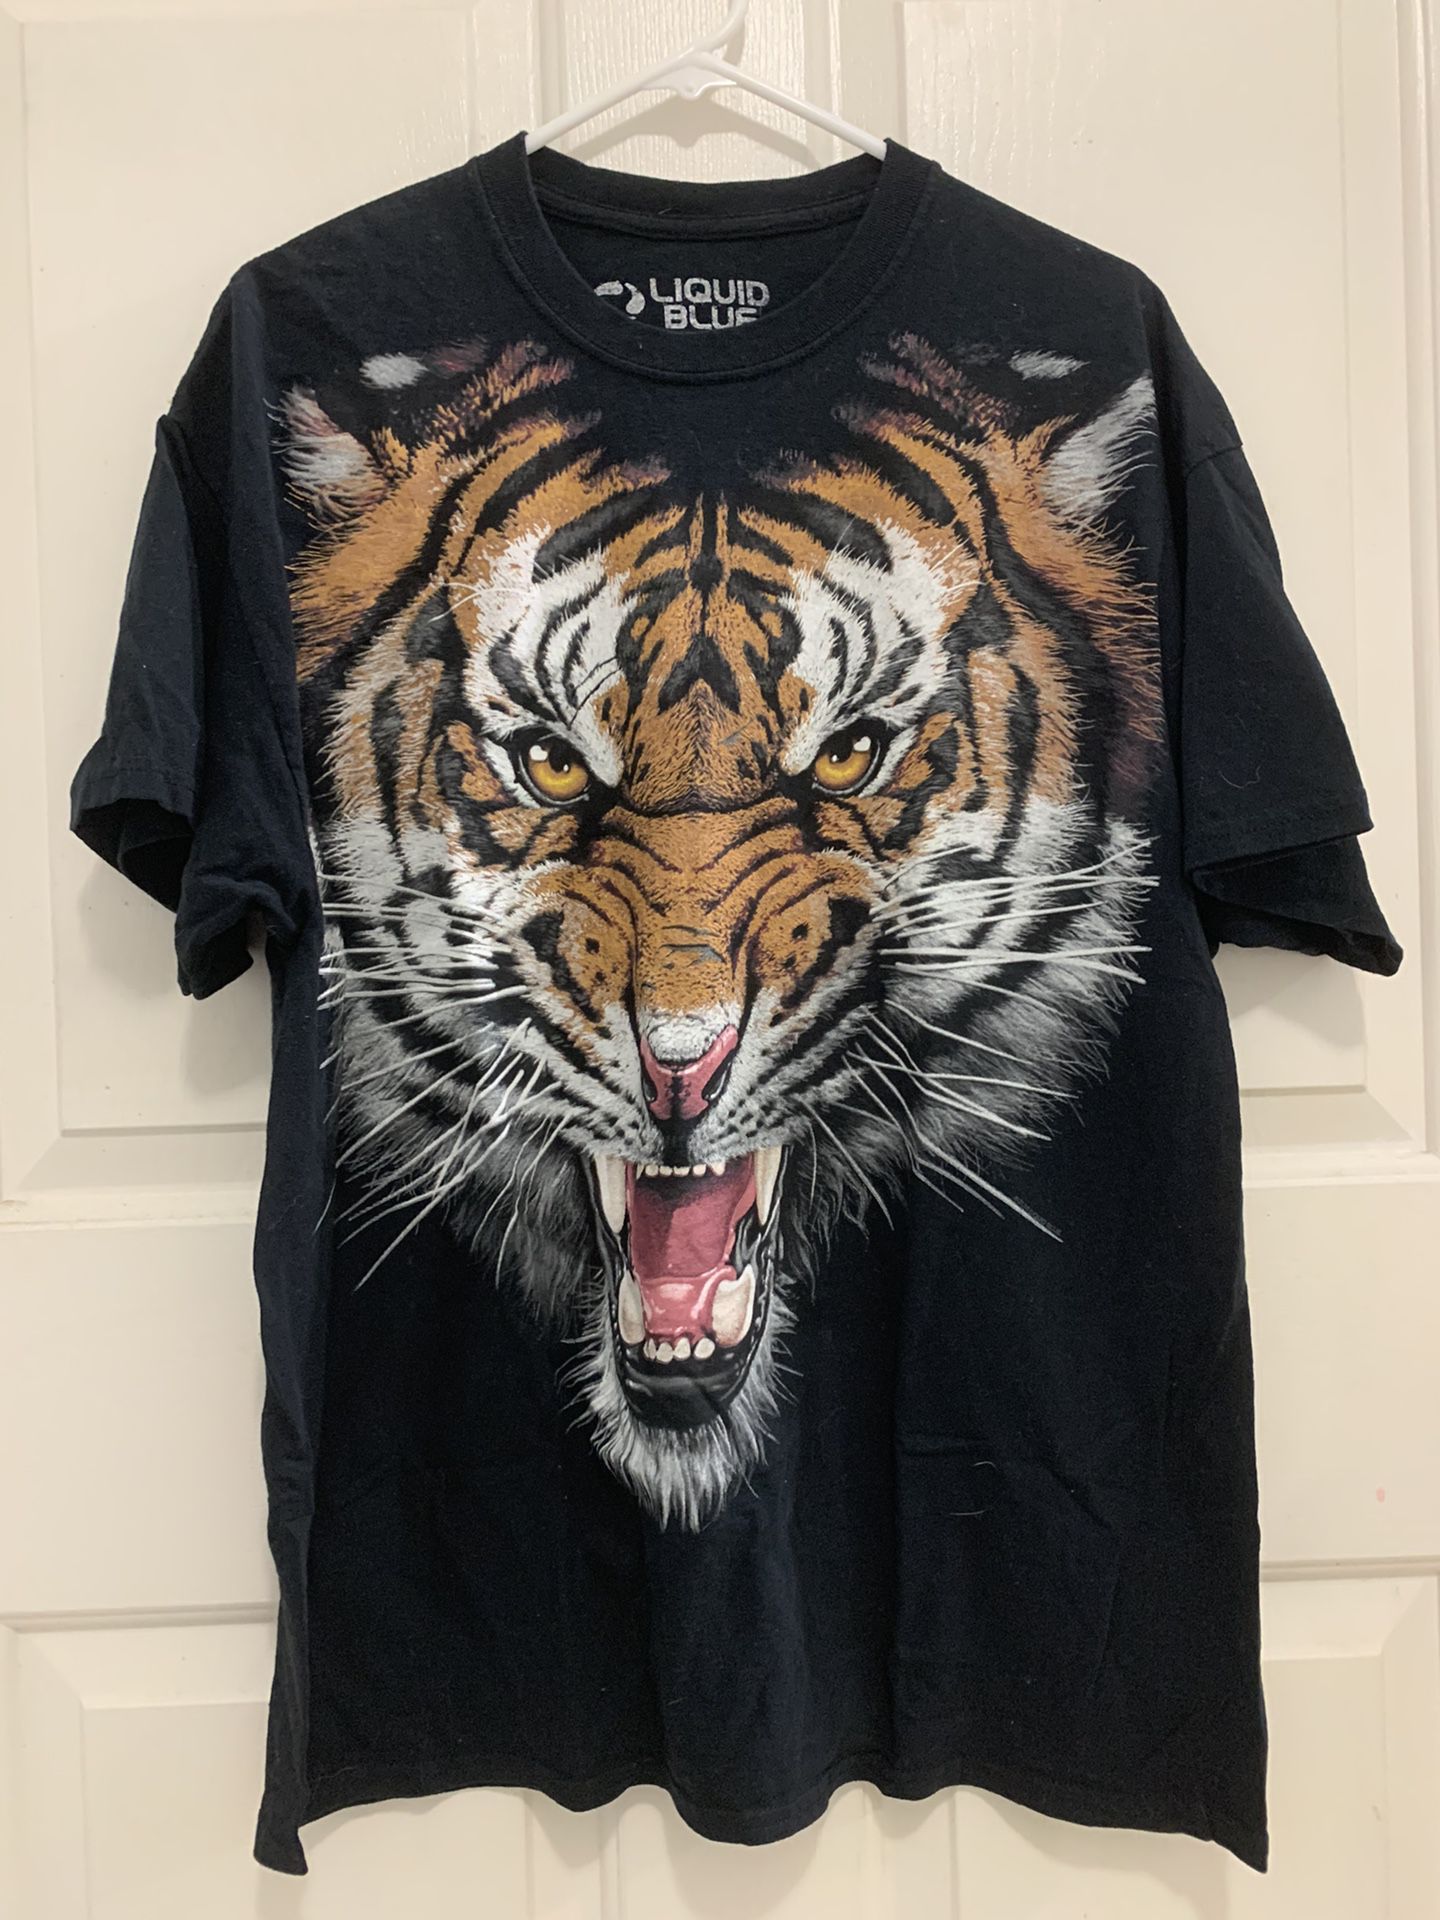 Liquid Blue Tiger Shirt “Bengals” XL for Sale in Hope Mills, NC - OfferUp